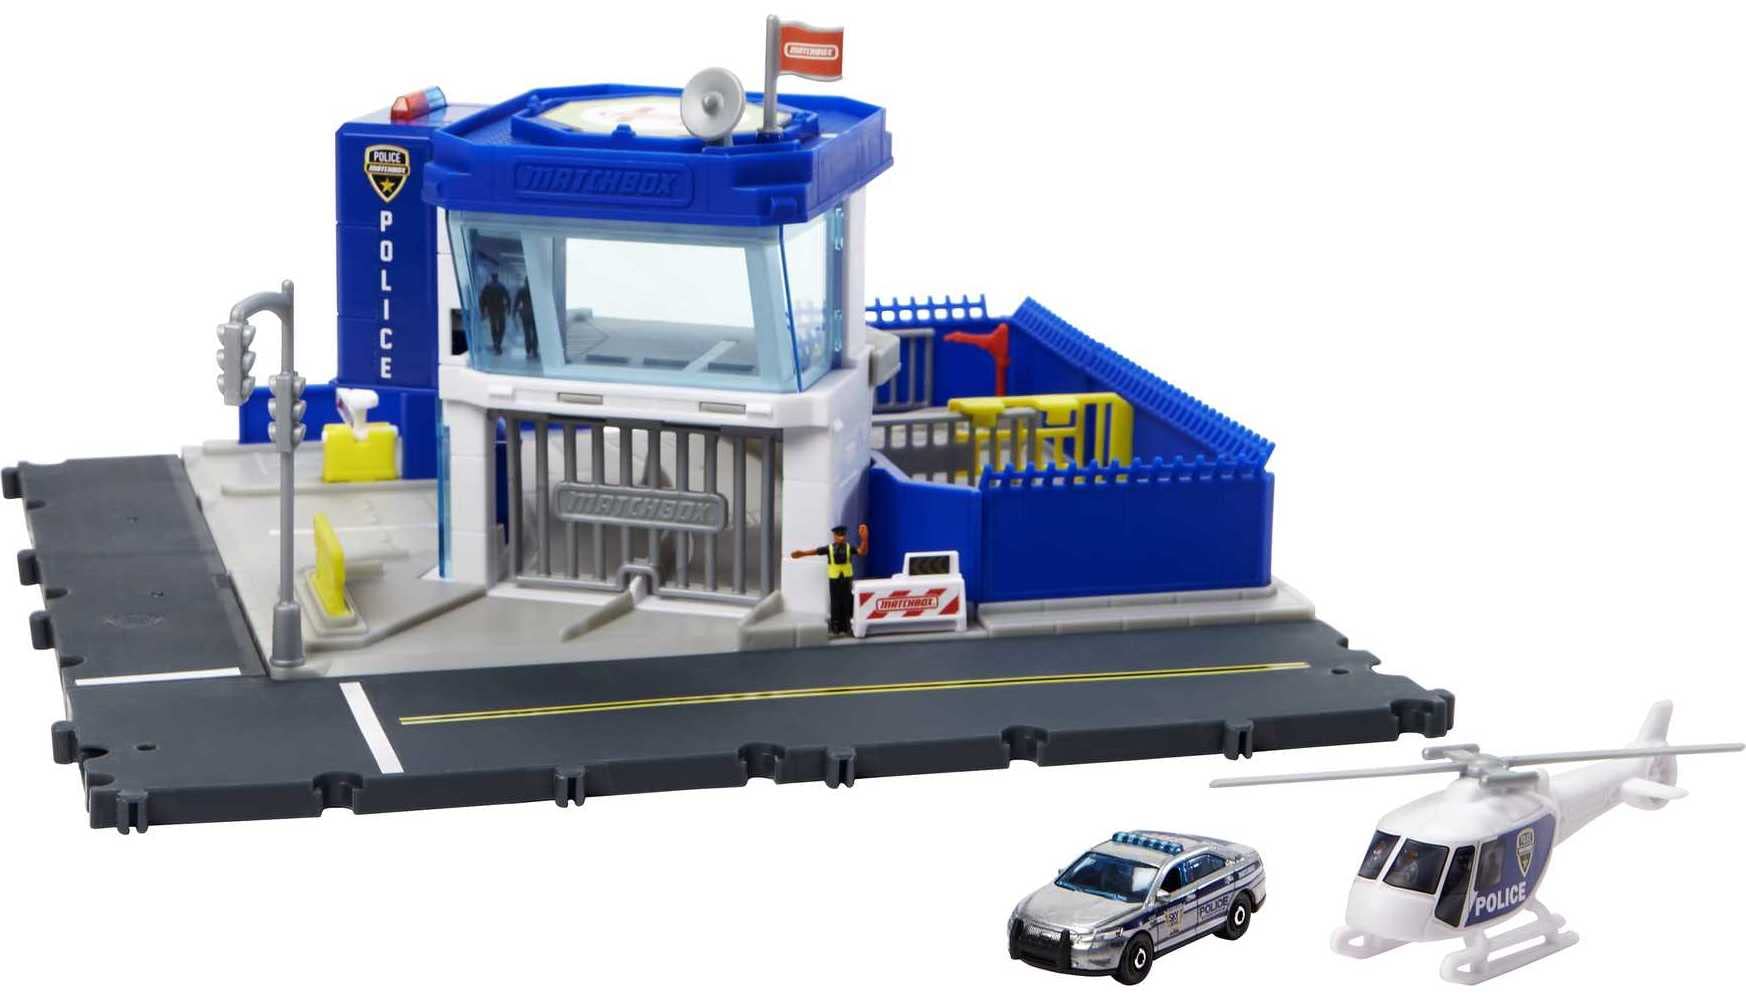 Matchbox Action Drivers Police Station Dispatch Playset with 1 Helicopter & 1 Ford Police Car, with Lights & Sounds $9